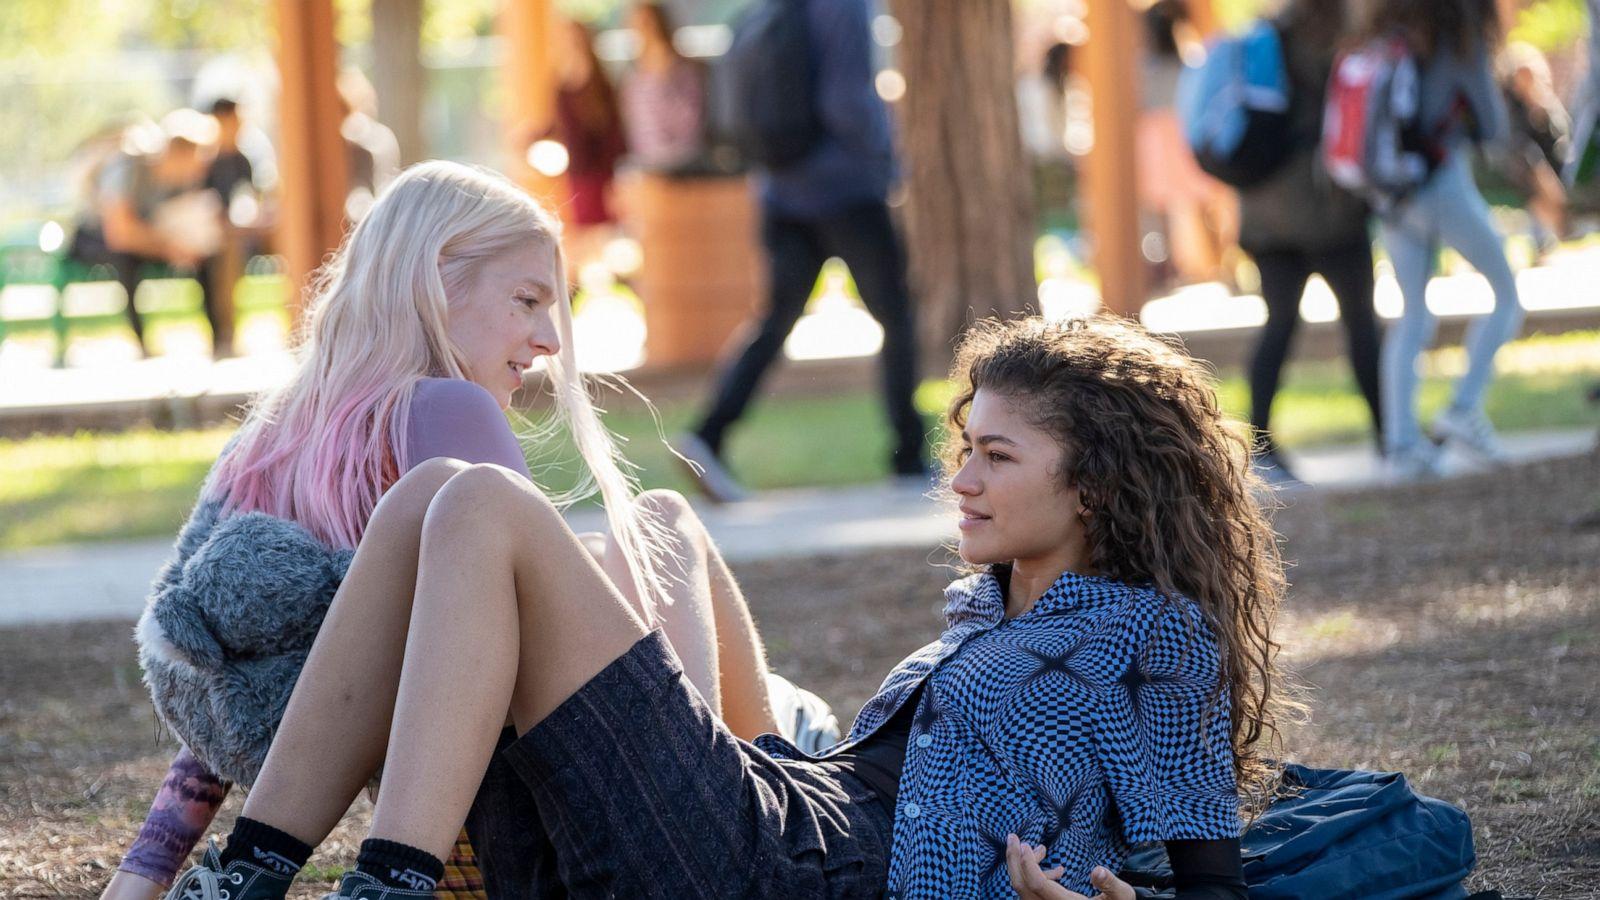 Creator of HBO's 'Euphoria' says it tries to be 'empathic'